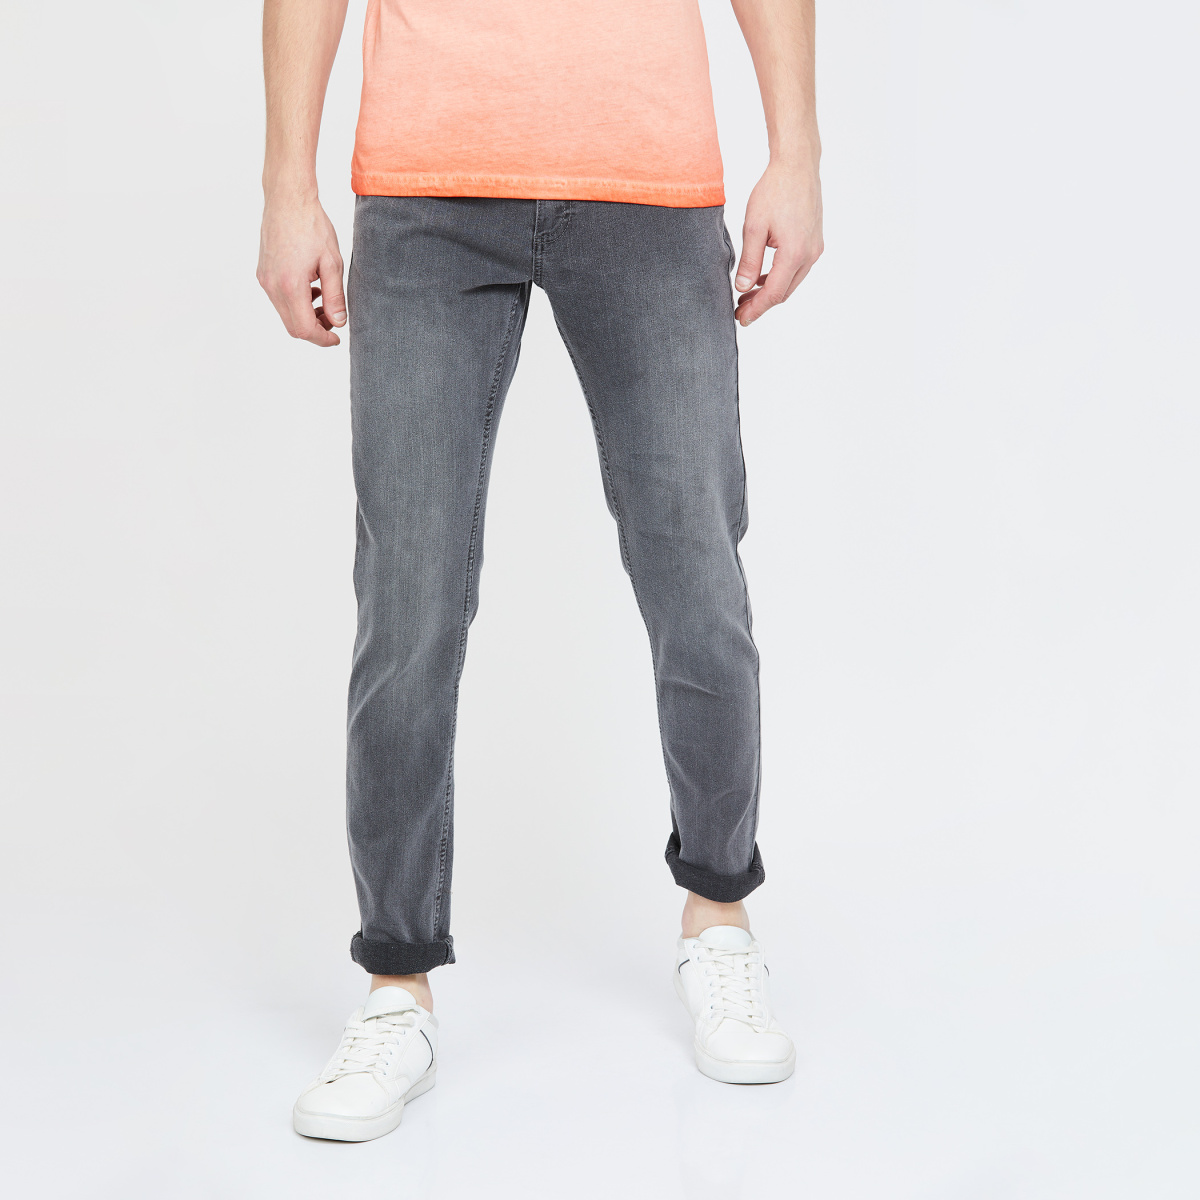 FORCA Stonewashed Slim Tapered Jeans